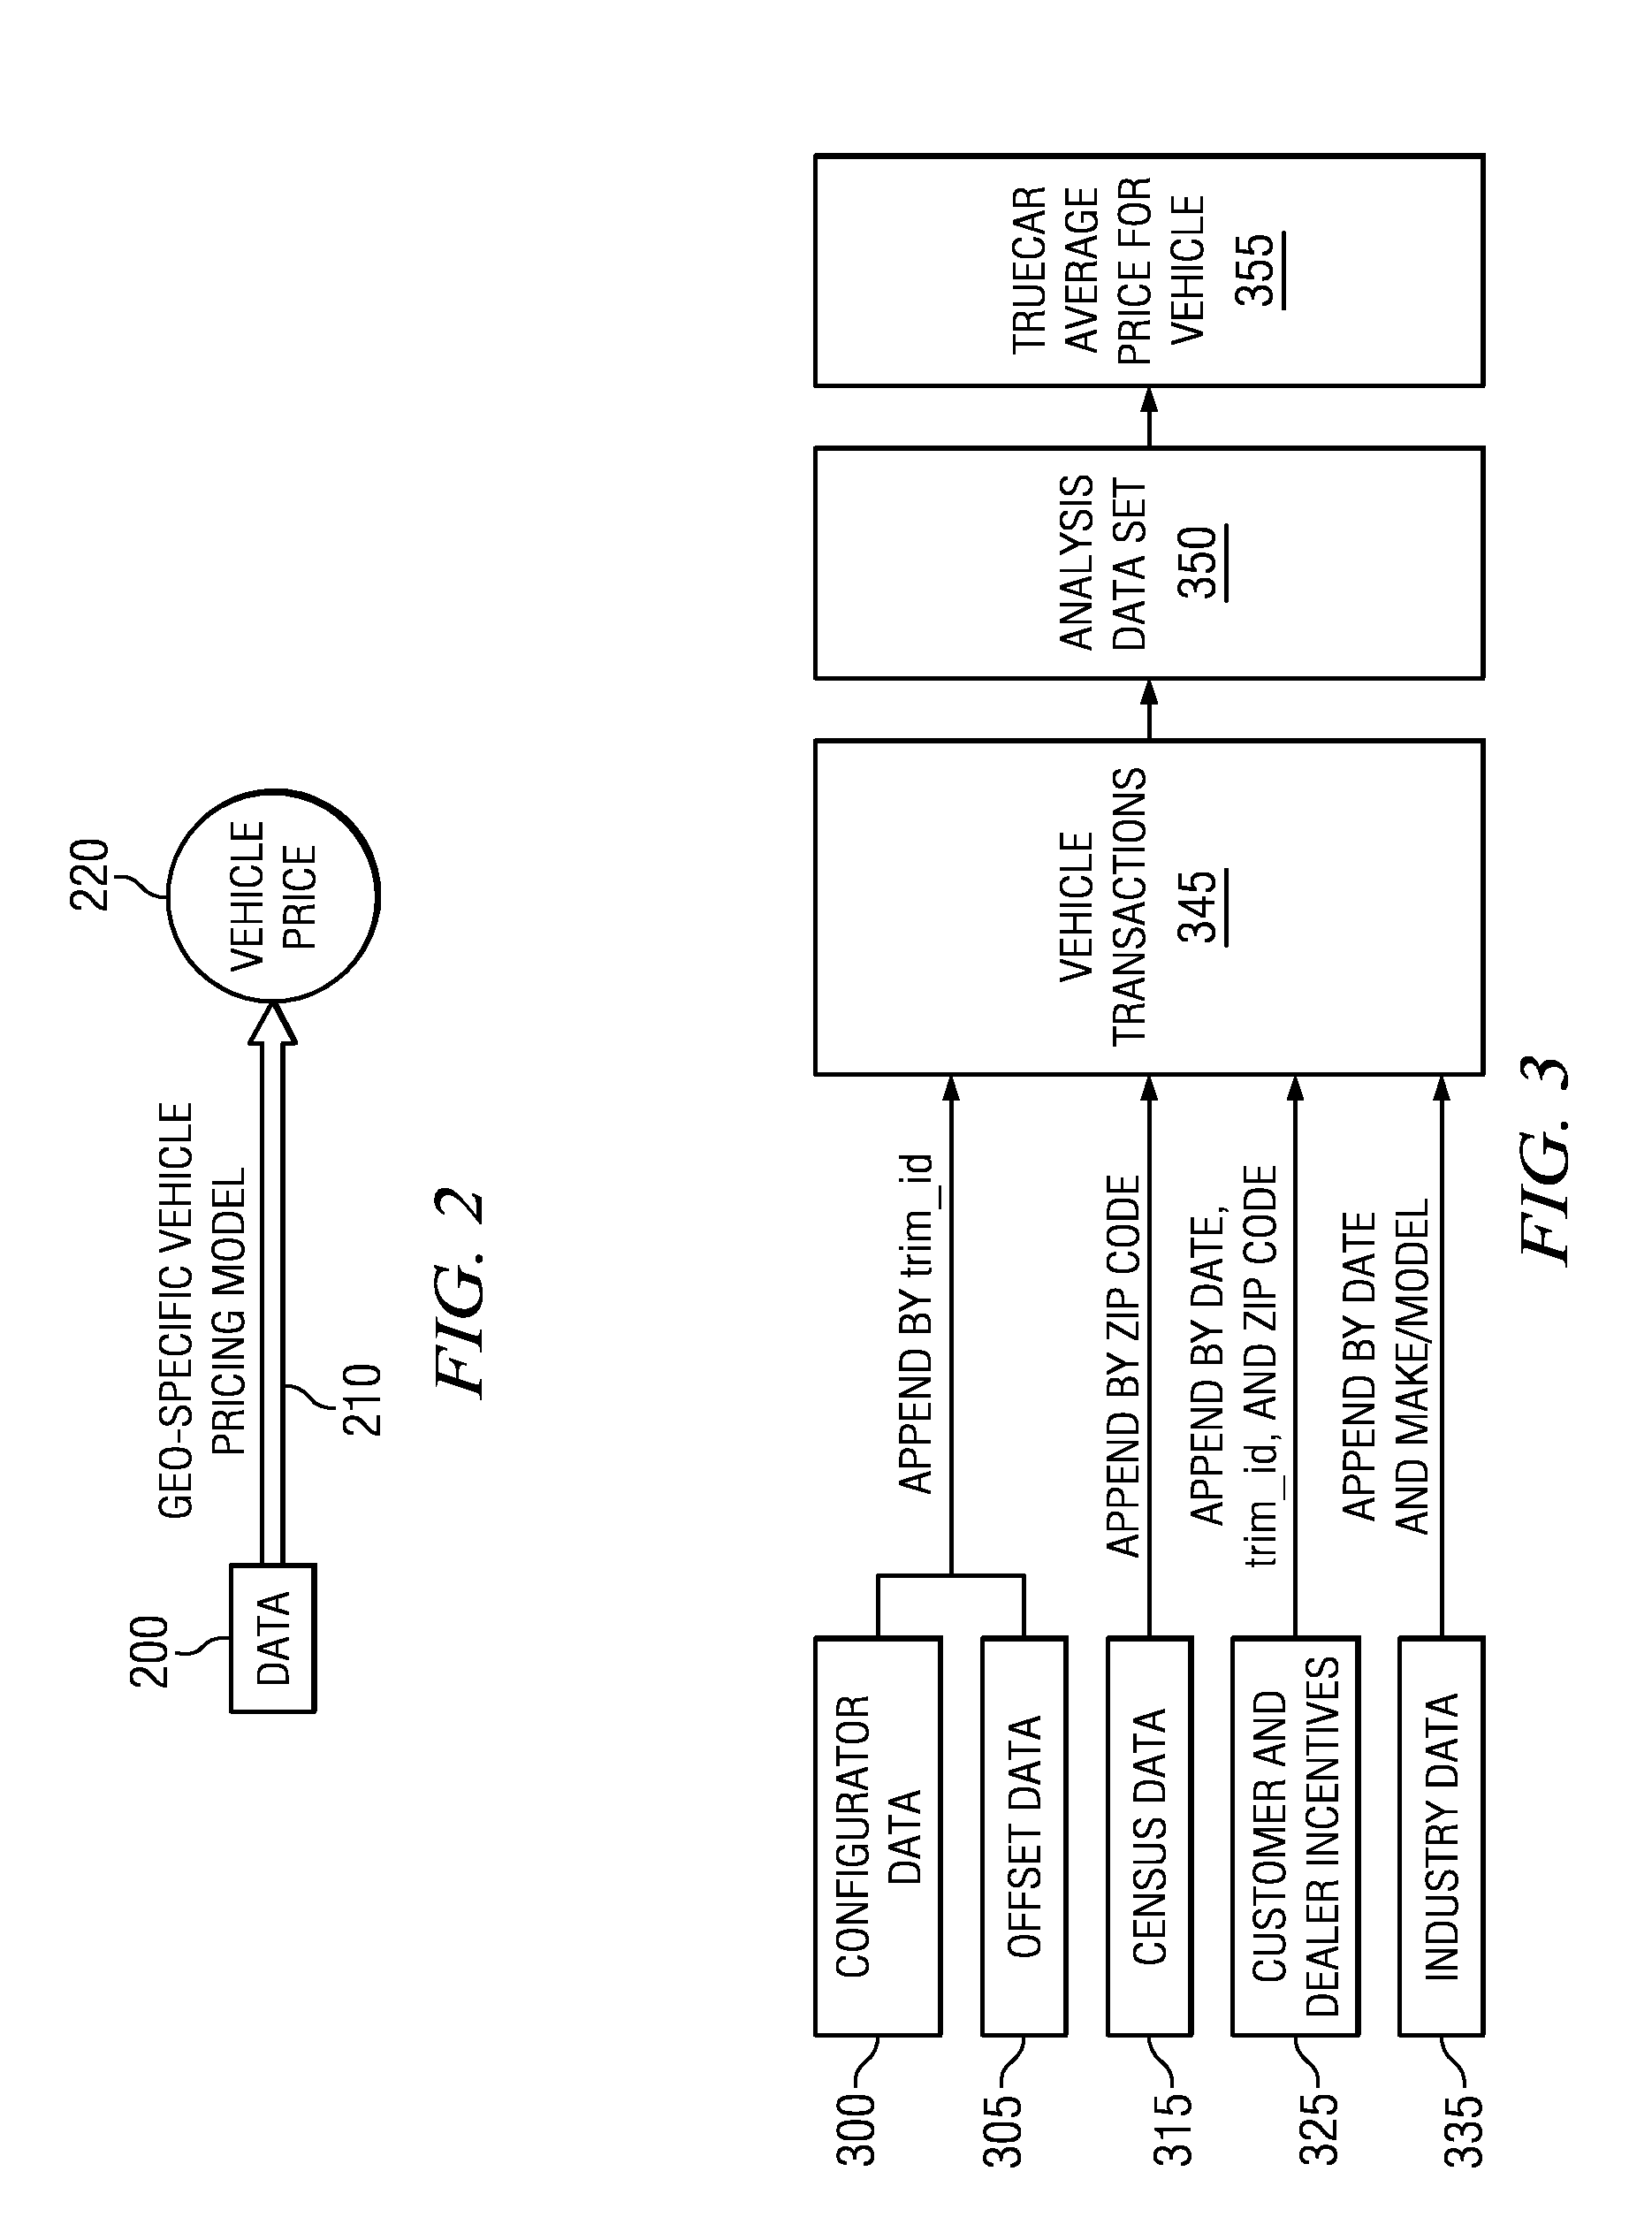 System, method and computer program product for geo-specific vehicle pricing